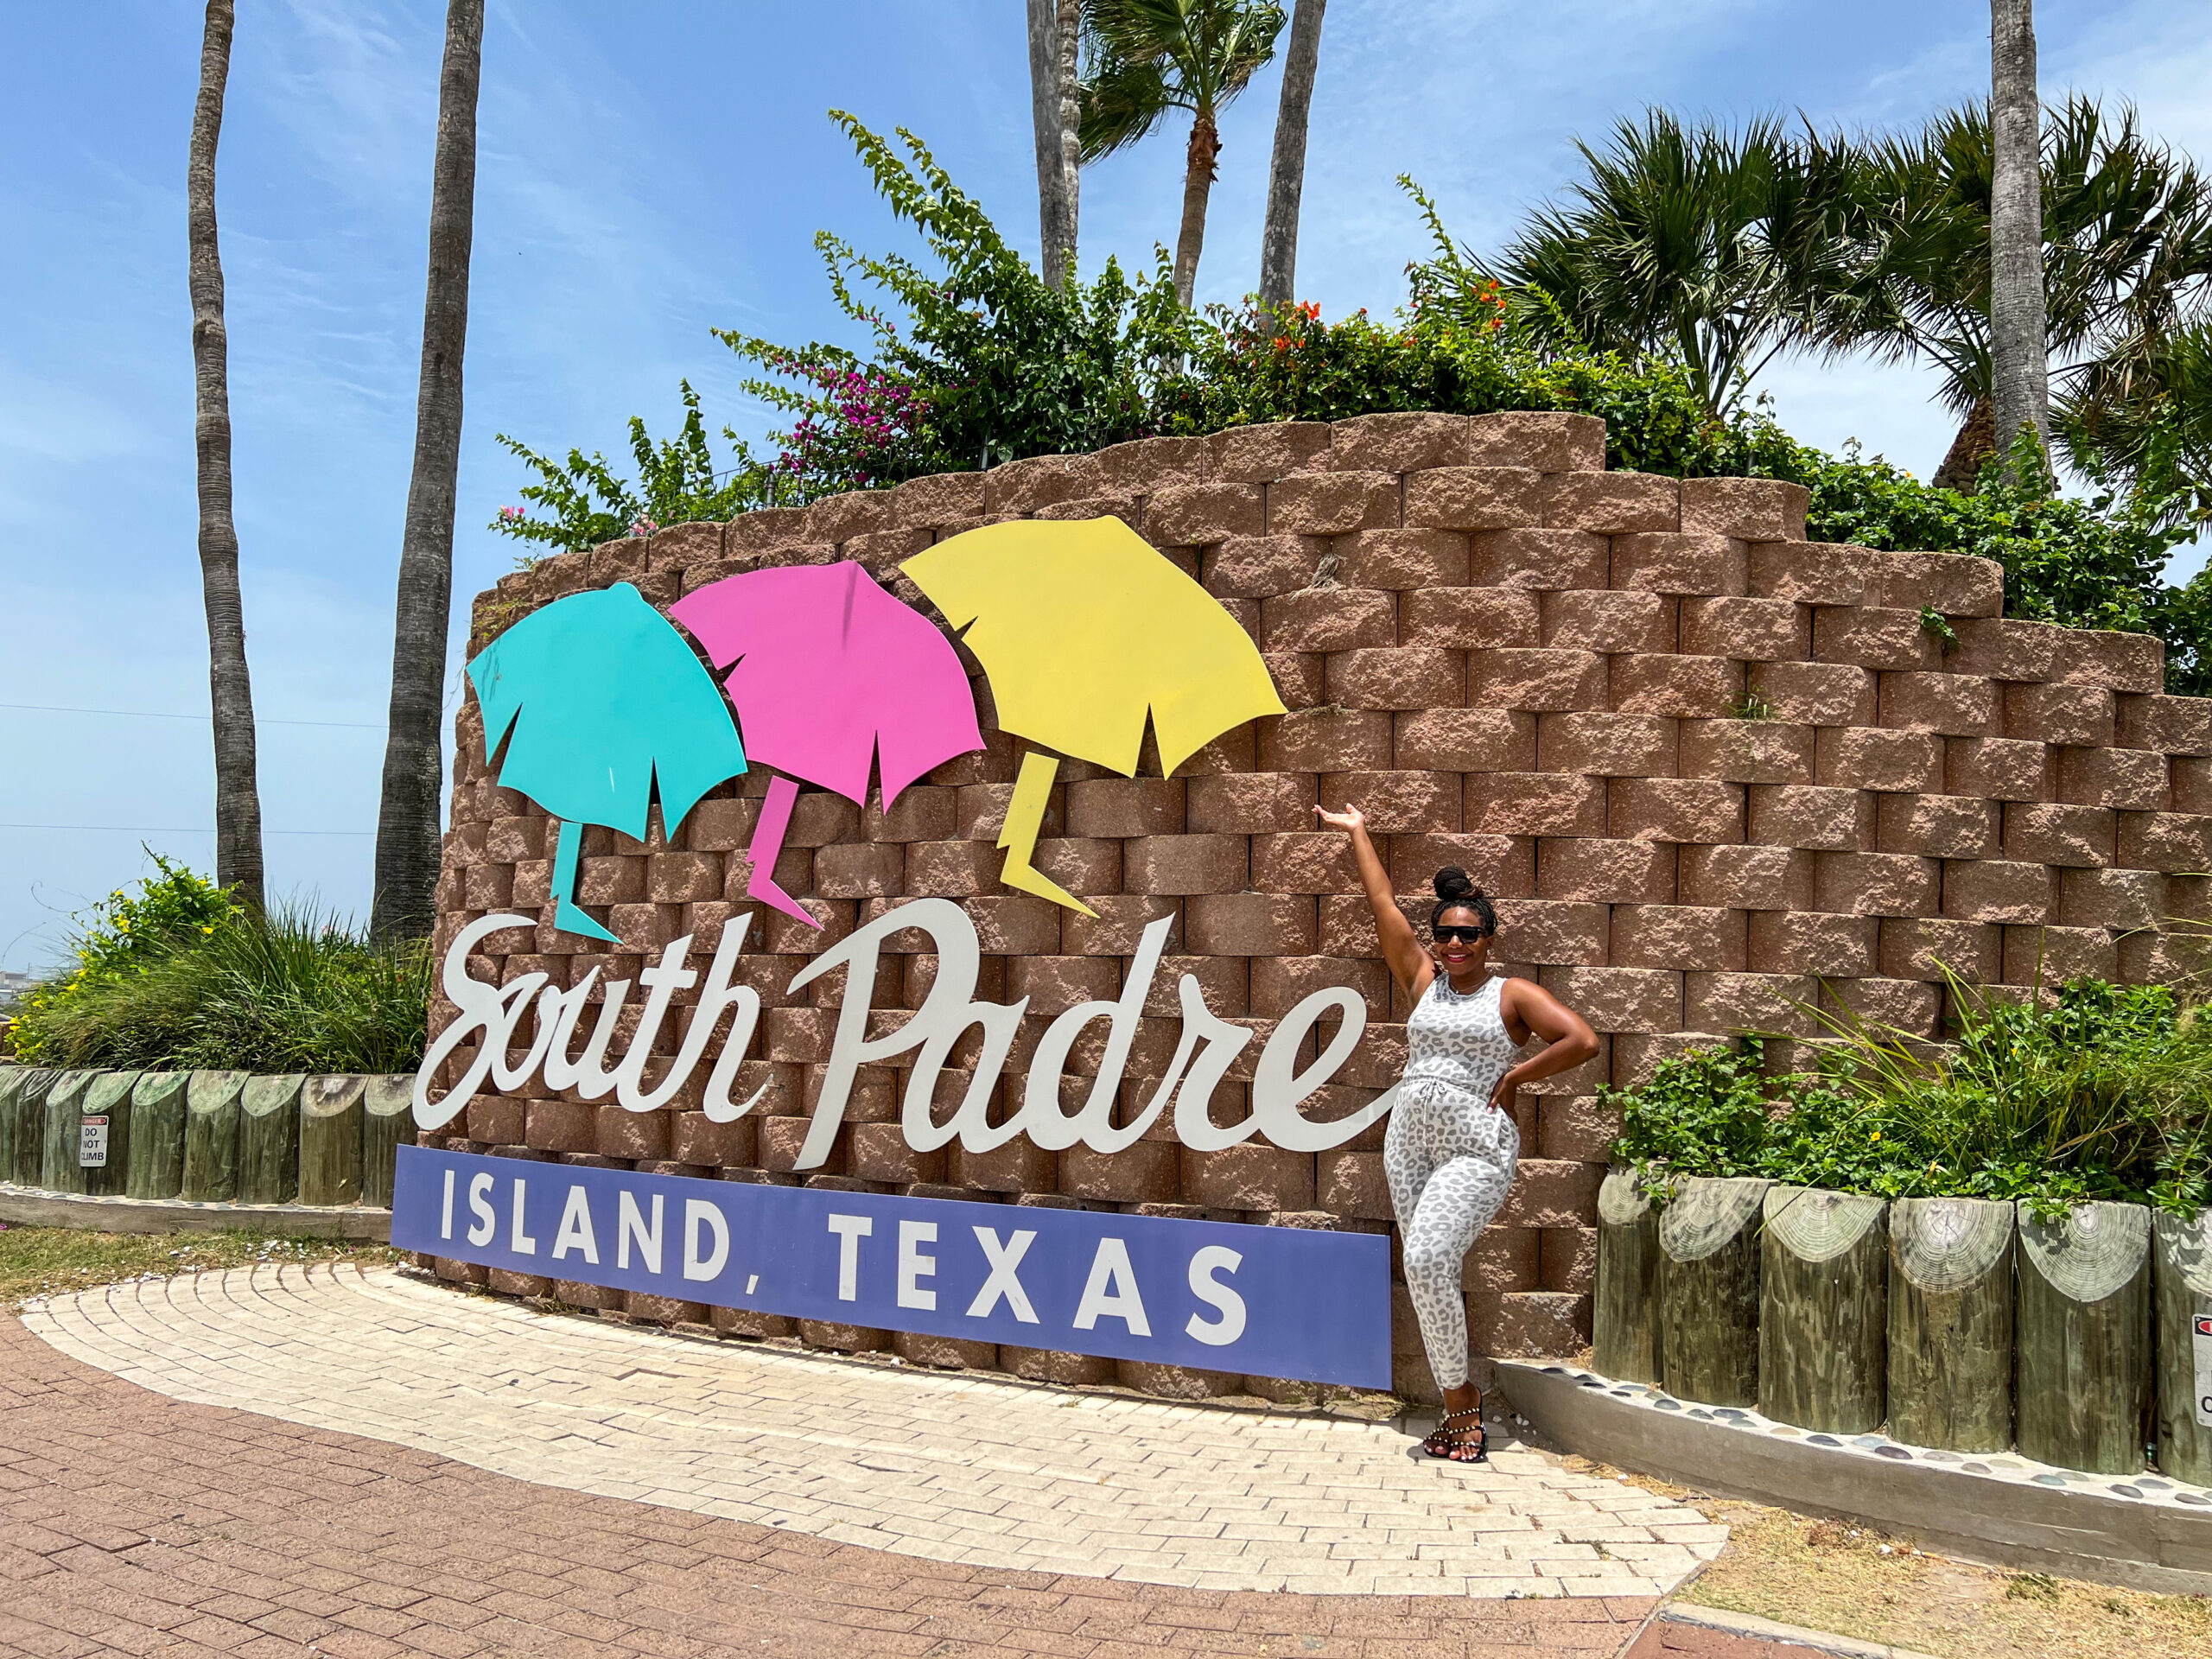 The Ultimate Guide to South Padre Island, Texas